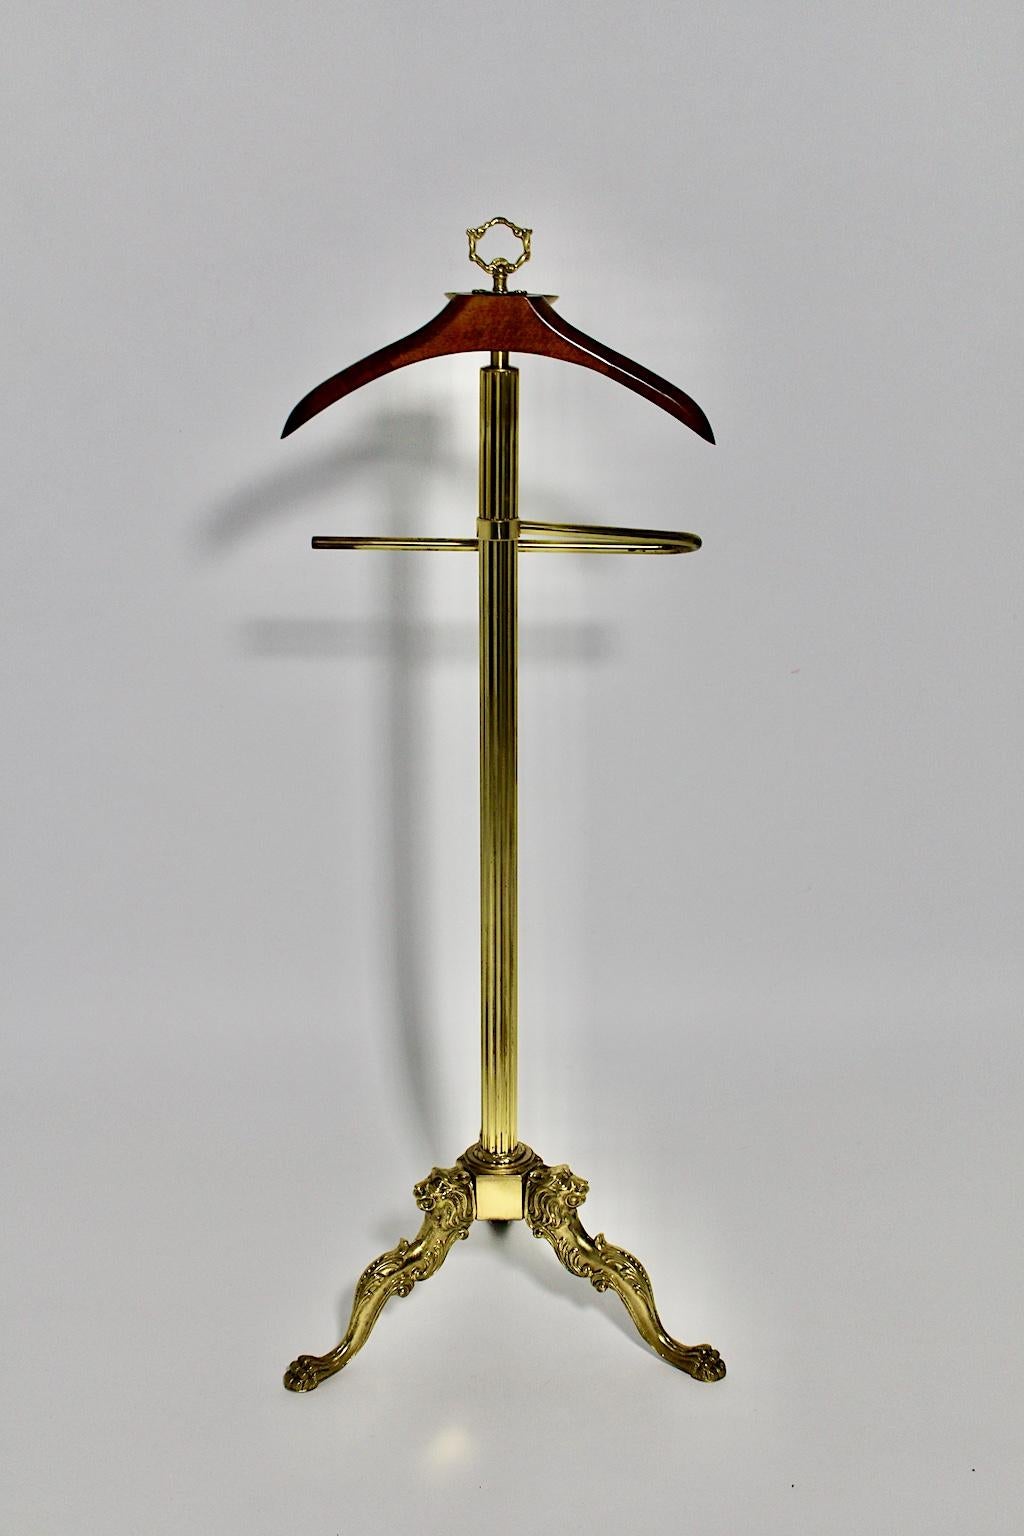 A Hollywood Regency style vintage brass beech valet or coat rack, which was designed and manufactured Italy 1970s.
The body of the three legged elegant valet was made out of brass while the hanger was made of stained and lacquered beech. Also the